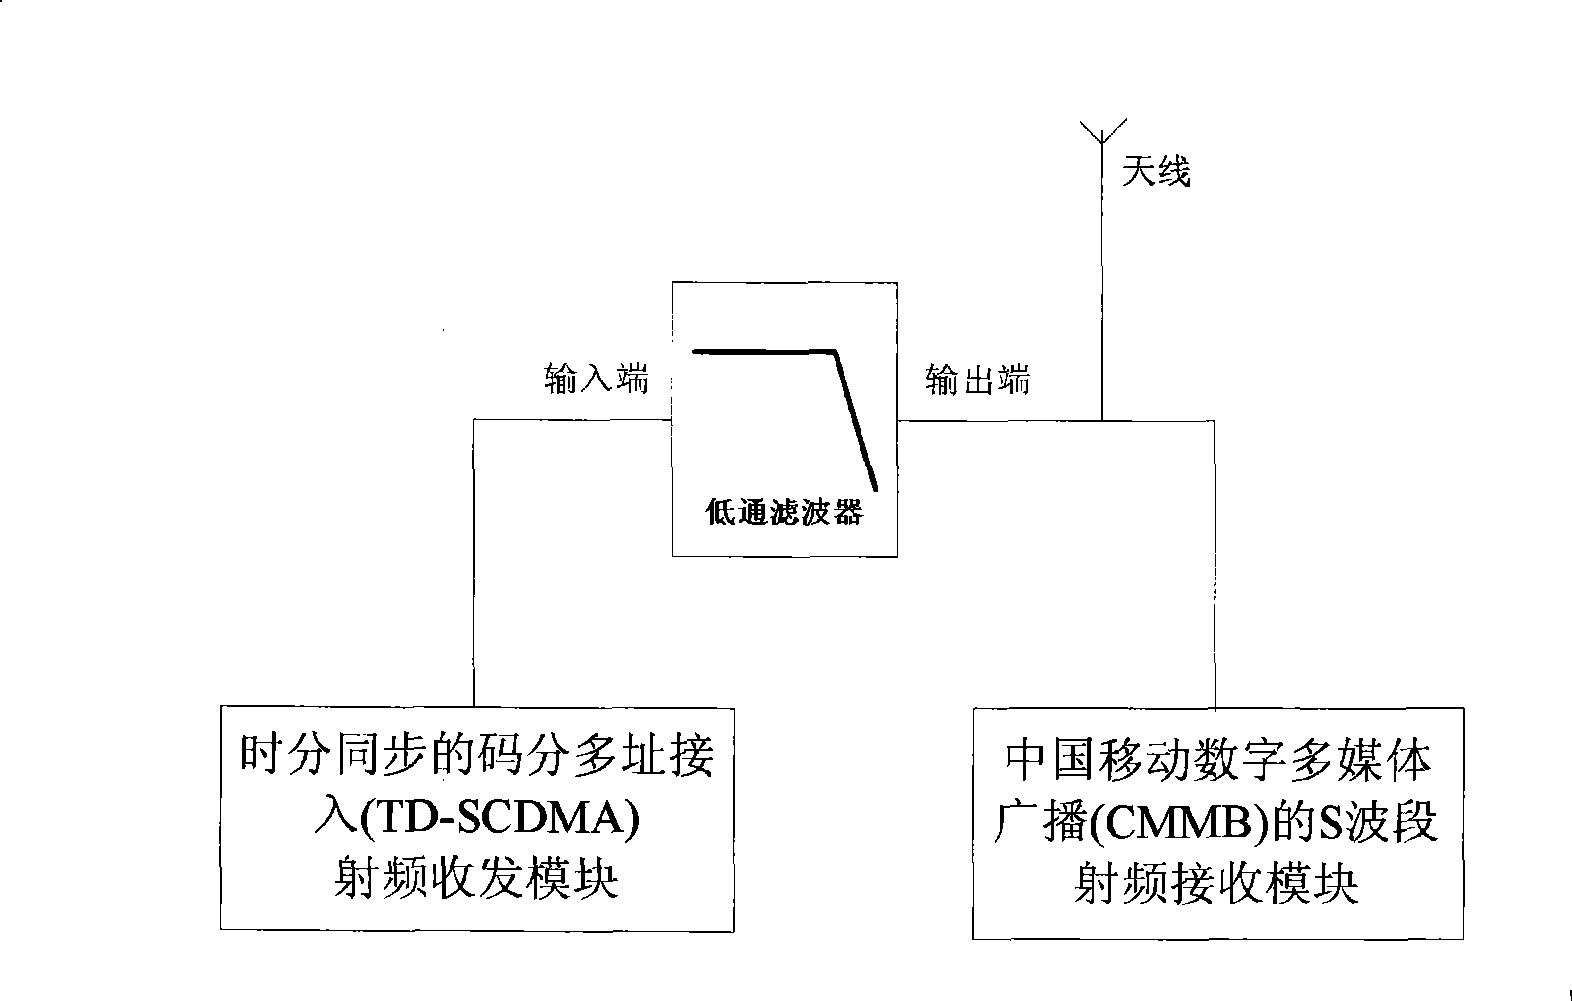 Mobile terminal of sharing antenna of mobile phone television and movable communication module